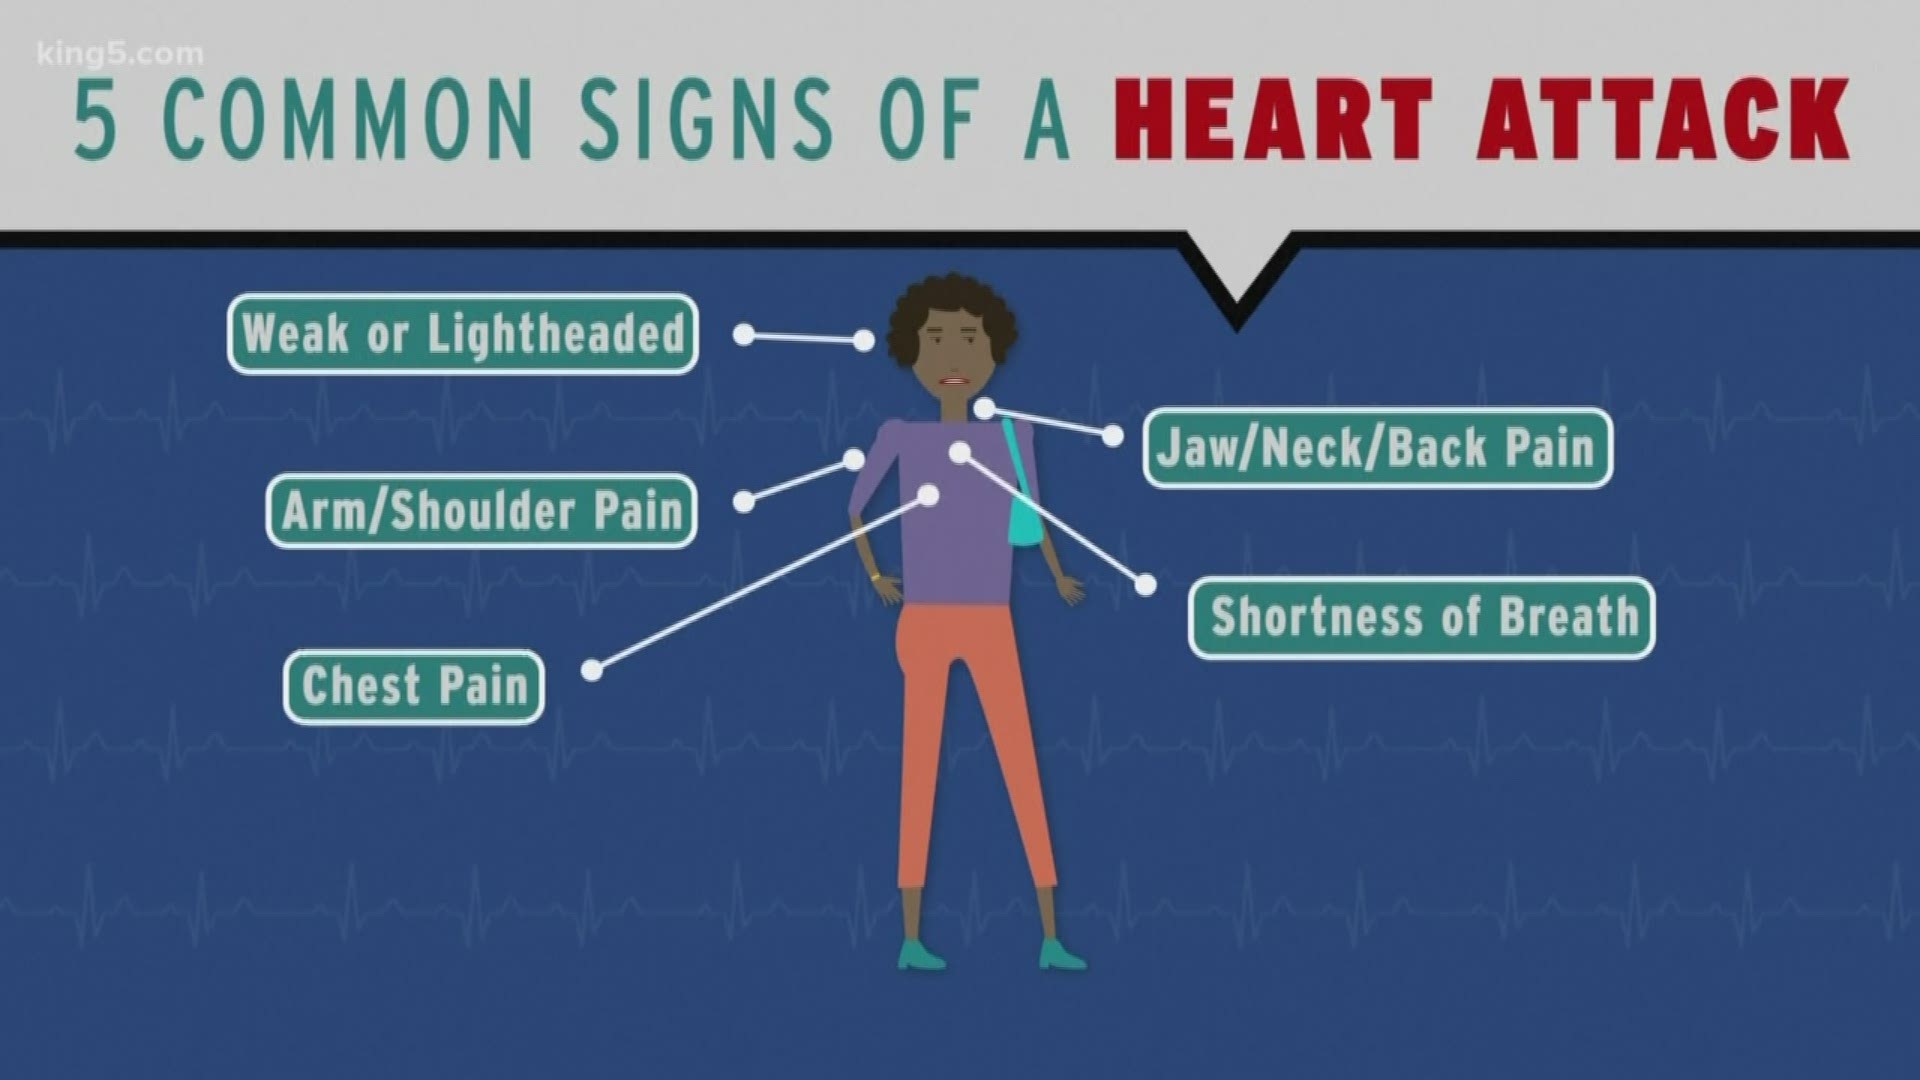 KING 5's Amity Addrisi helps viewers understand the telltale signs of a heart attack during tonight's HealthLink story.